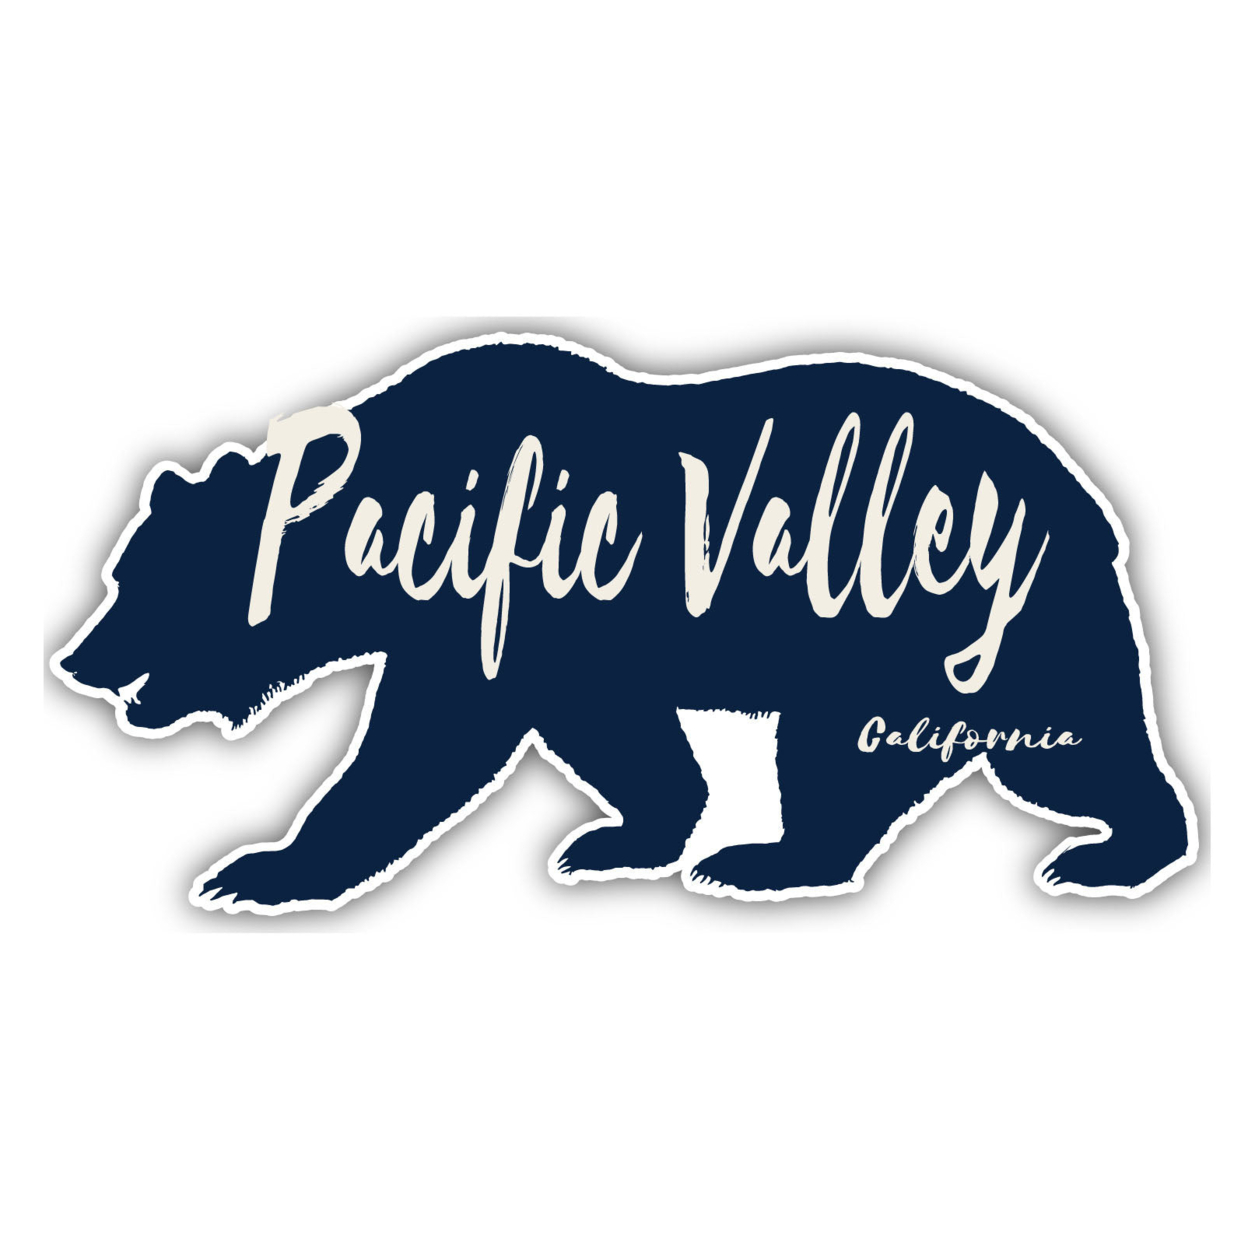 Pacific Valley California Souvenir Decorative Stickers (Choose Theme And Size) - Single Unit, 4-Inch, Bear